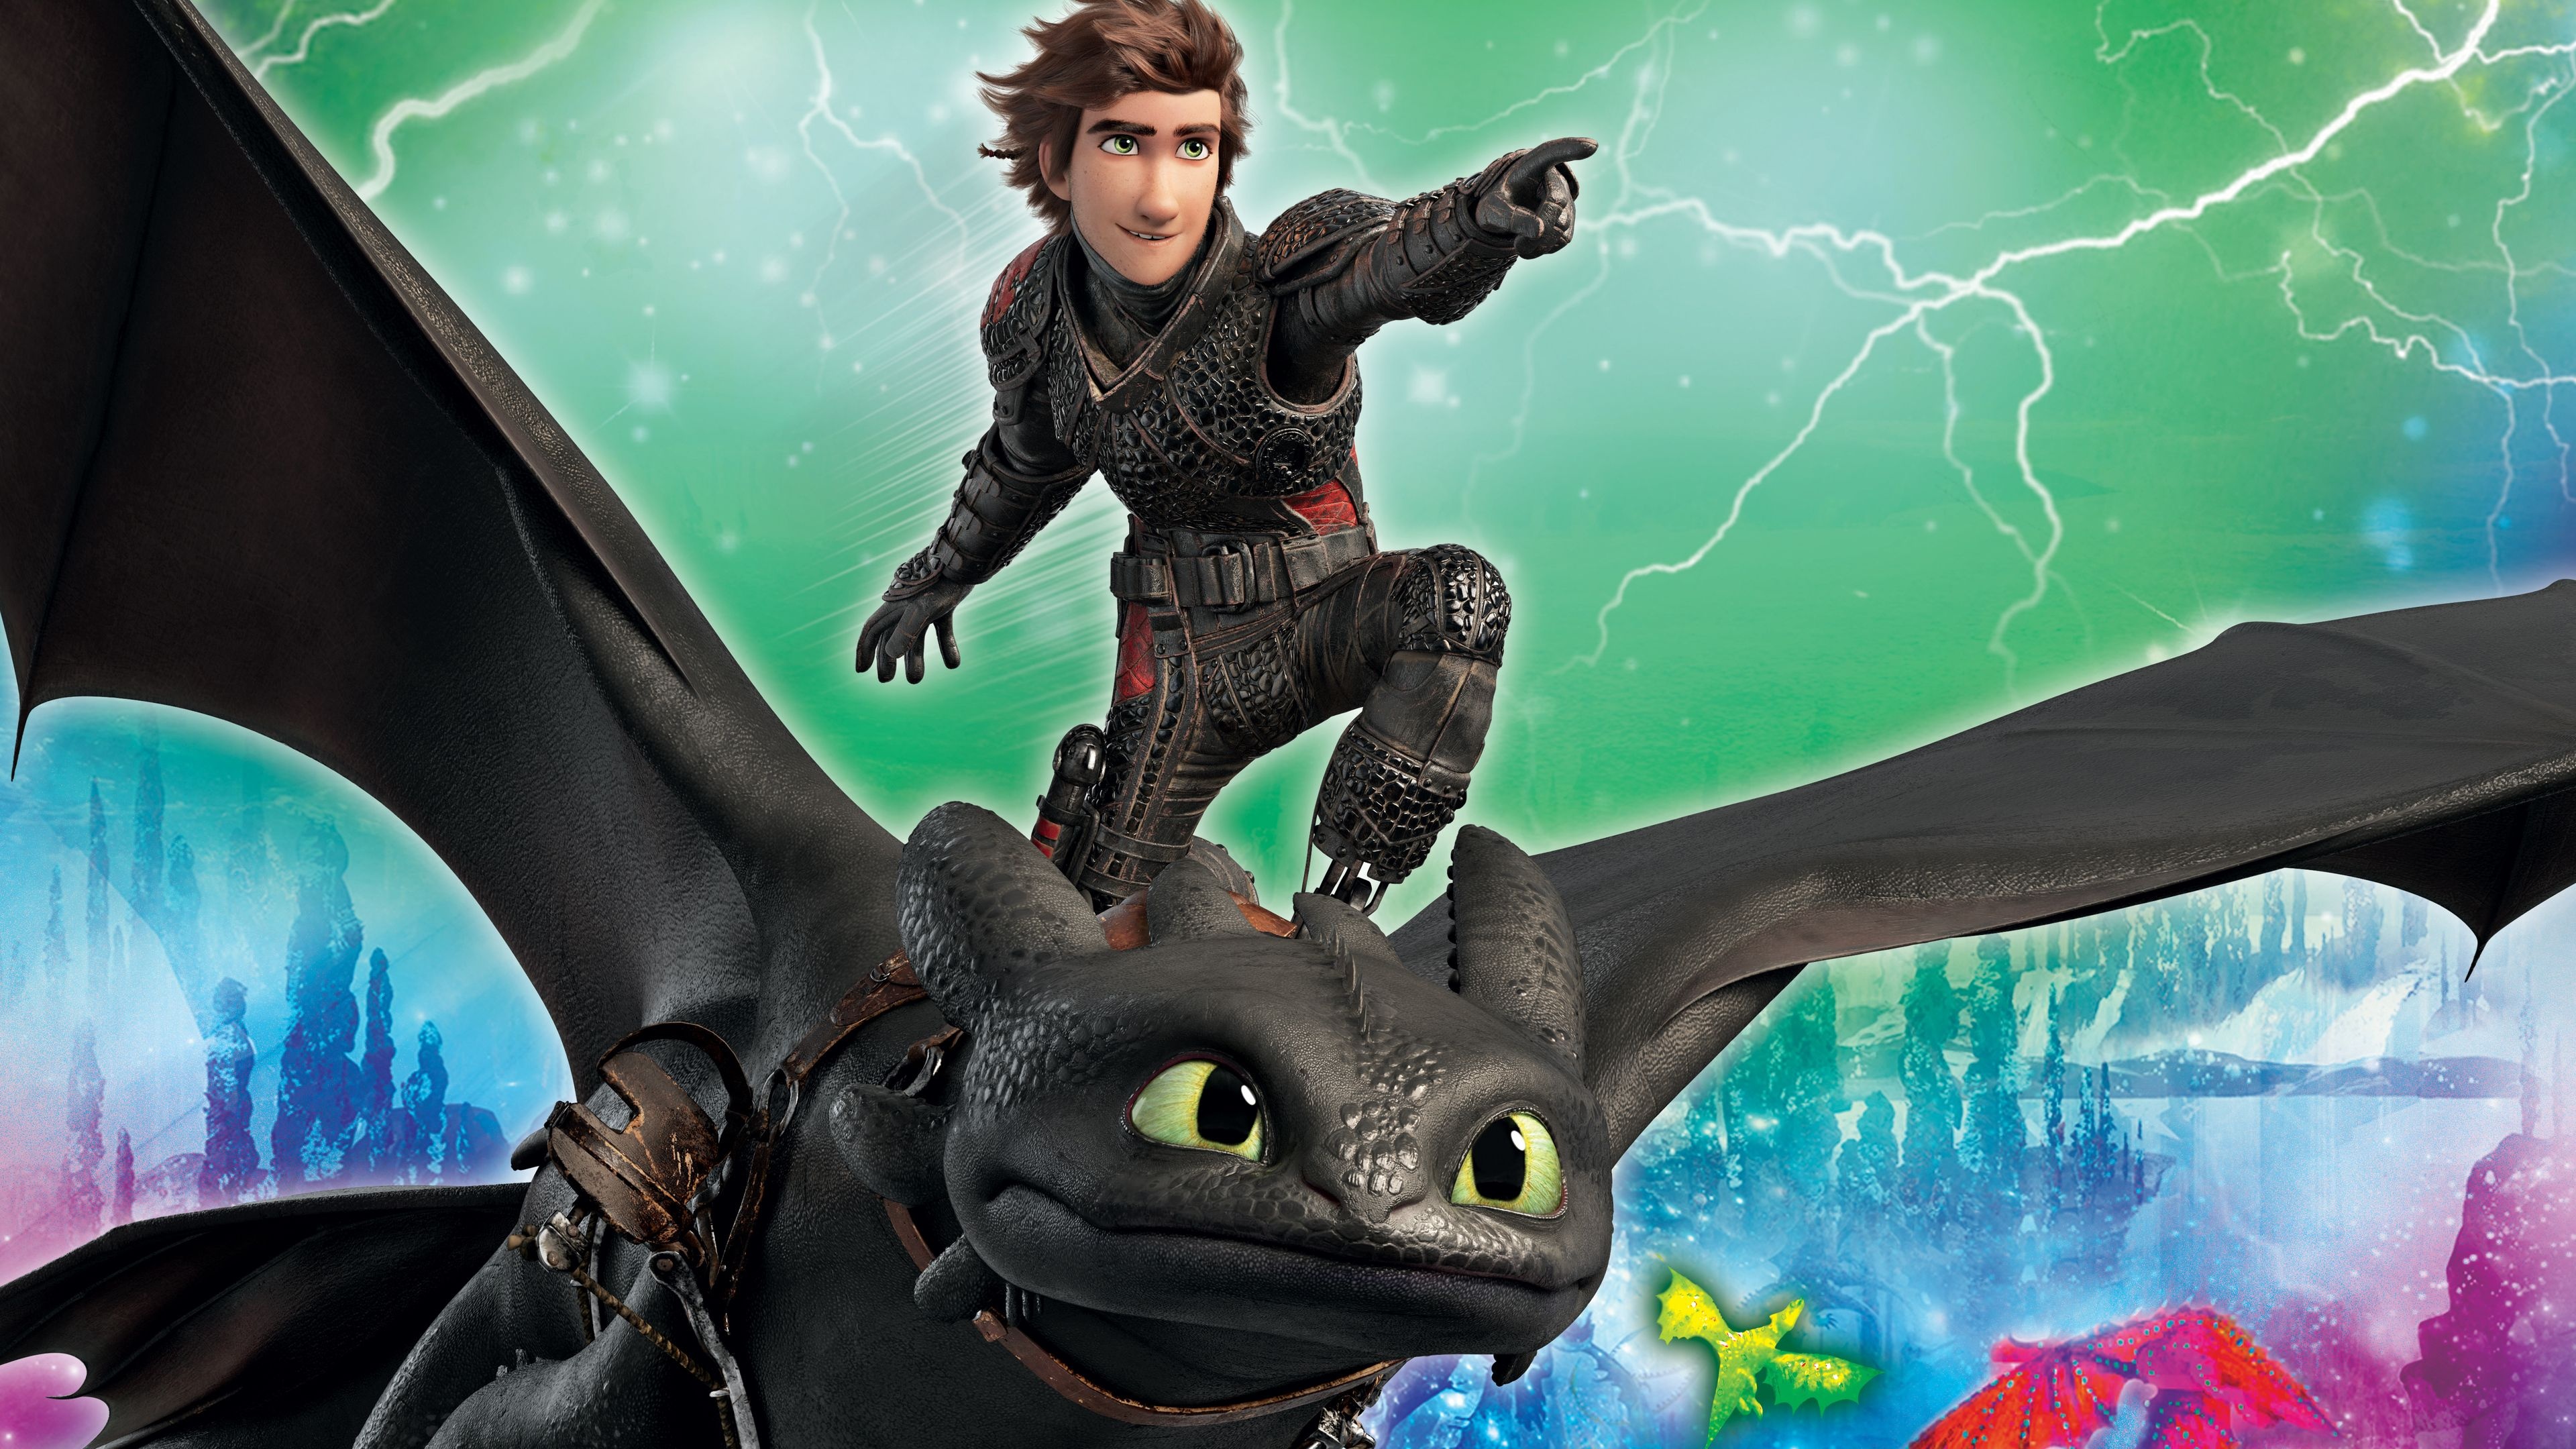 How to Train Your Dragon, 4K movies wallpapers, Animation, Hidden World, 3840x2160 4K Desktop